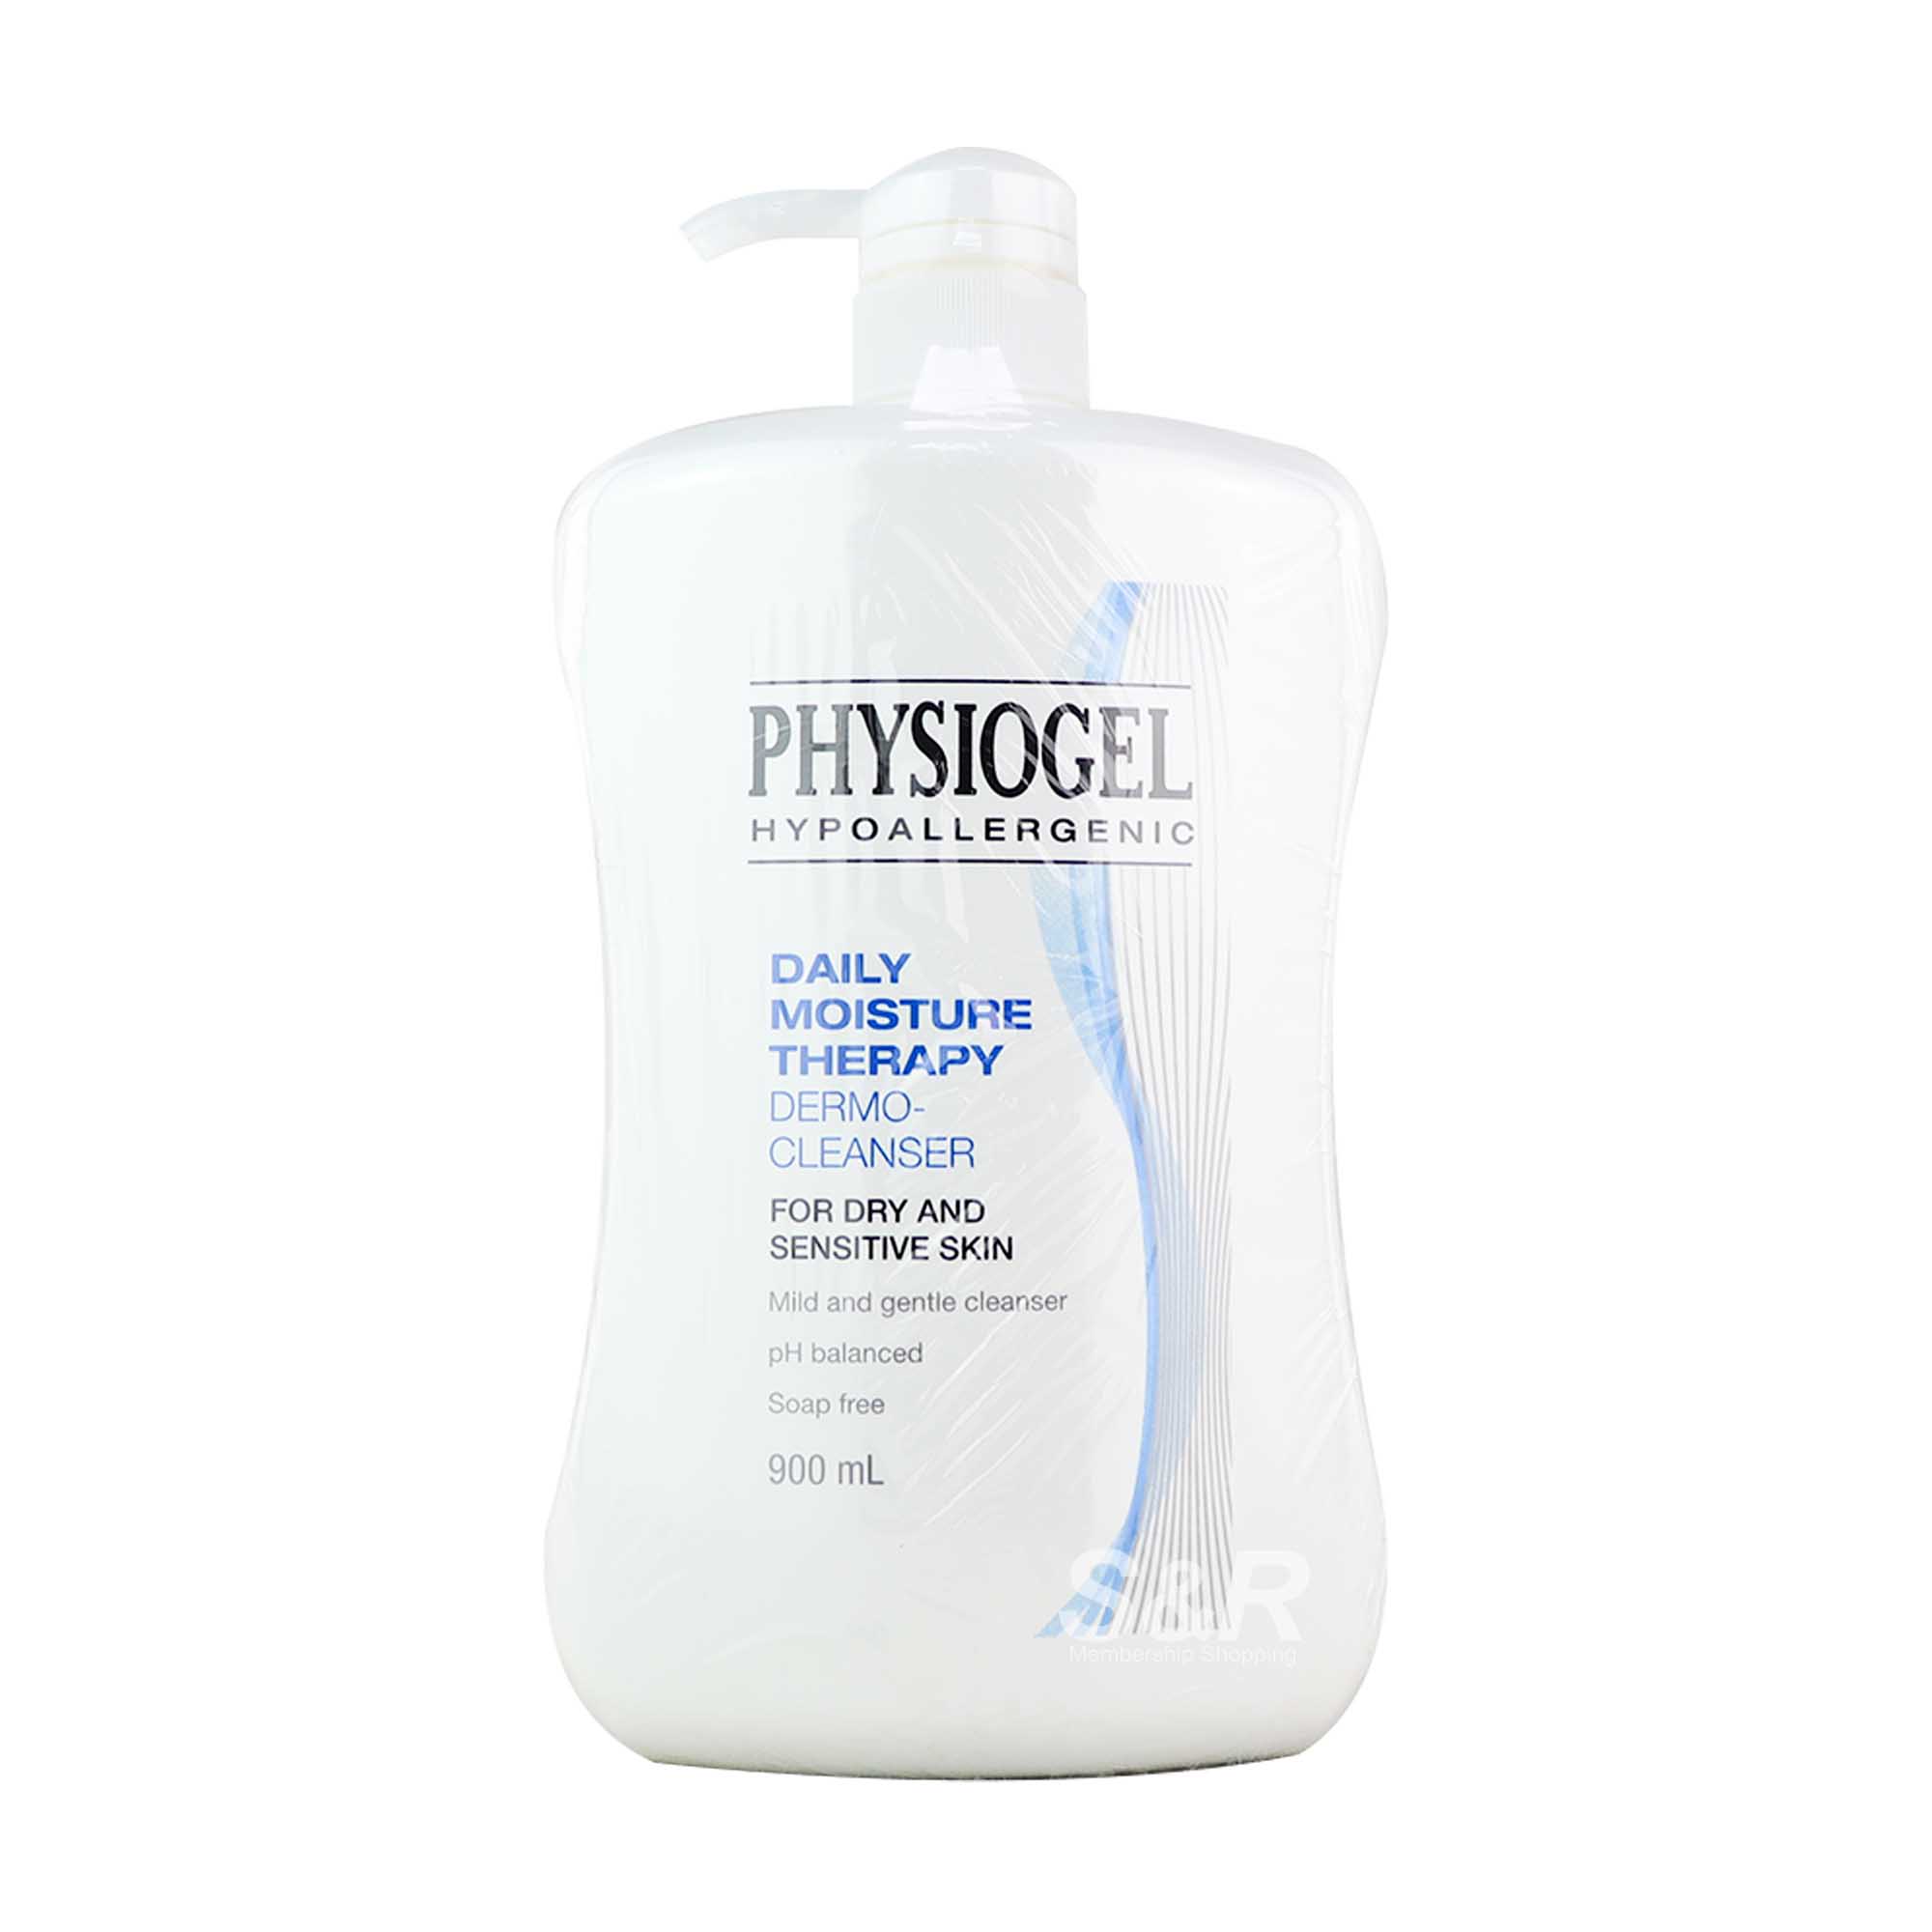 Physiogel Daily Moisture Therapy Dermo-Cleanser 900mL